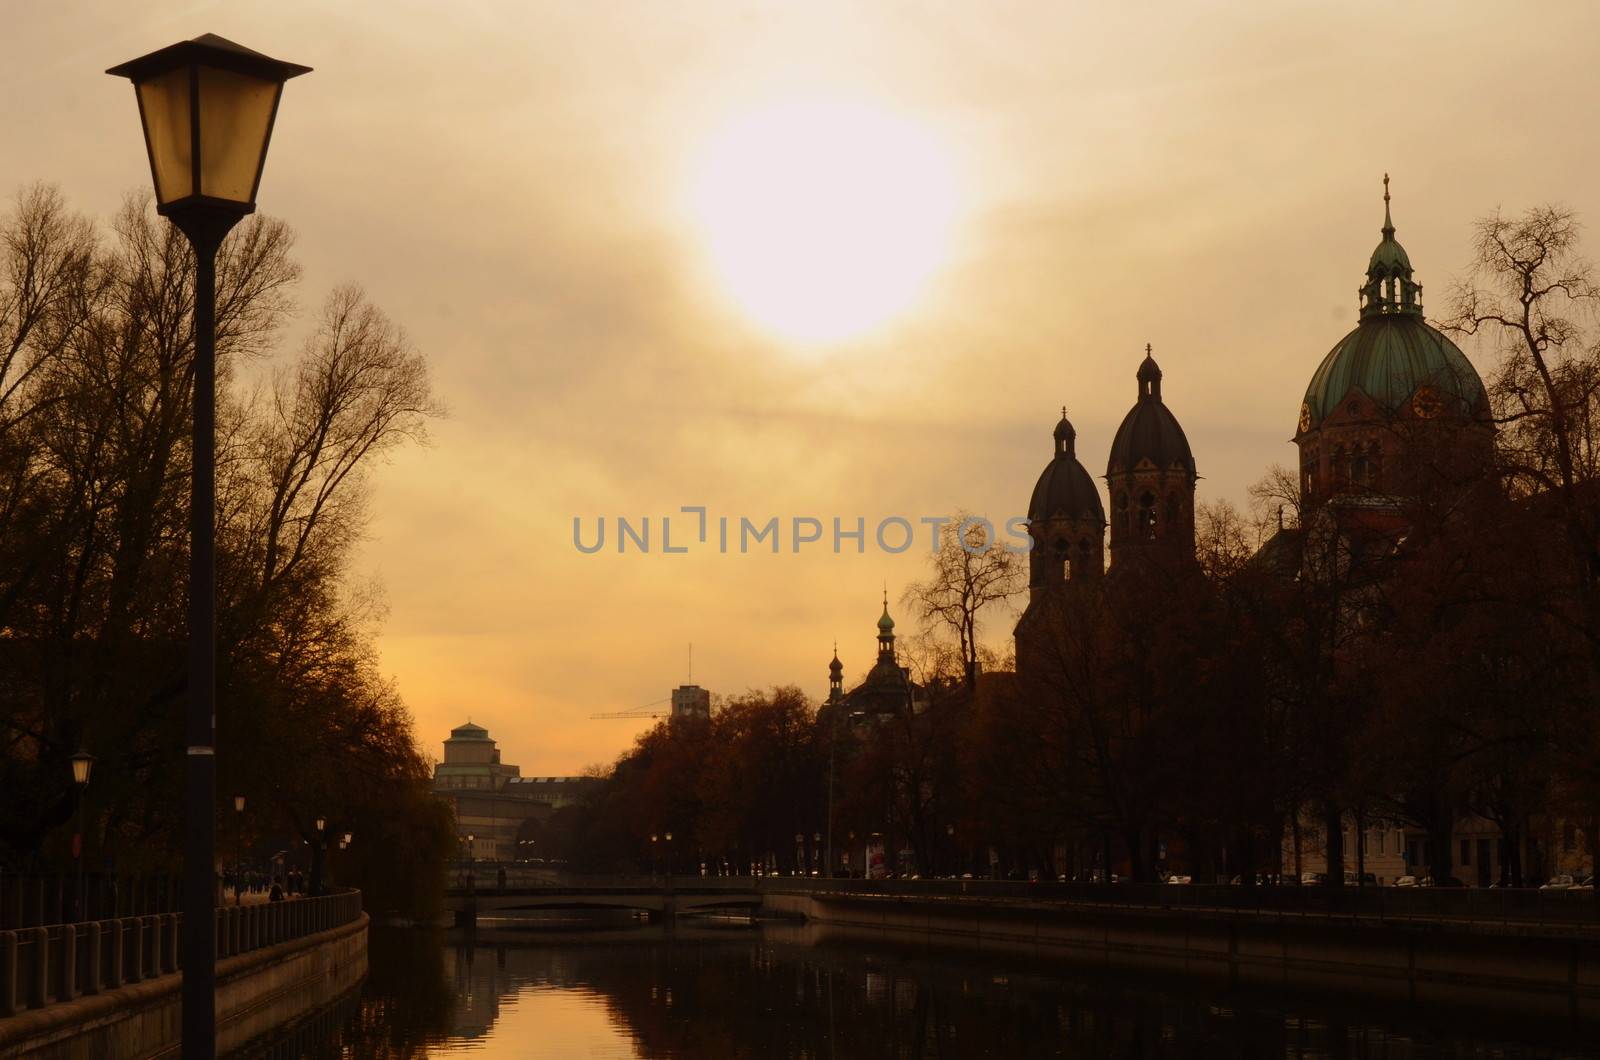 A Silhouette Of The Munich, Germany Skyline At Sunset